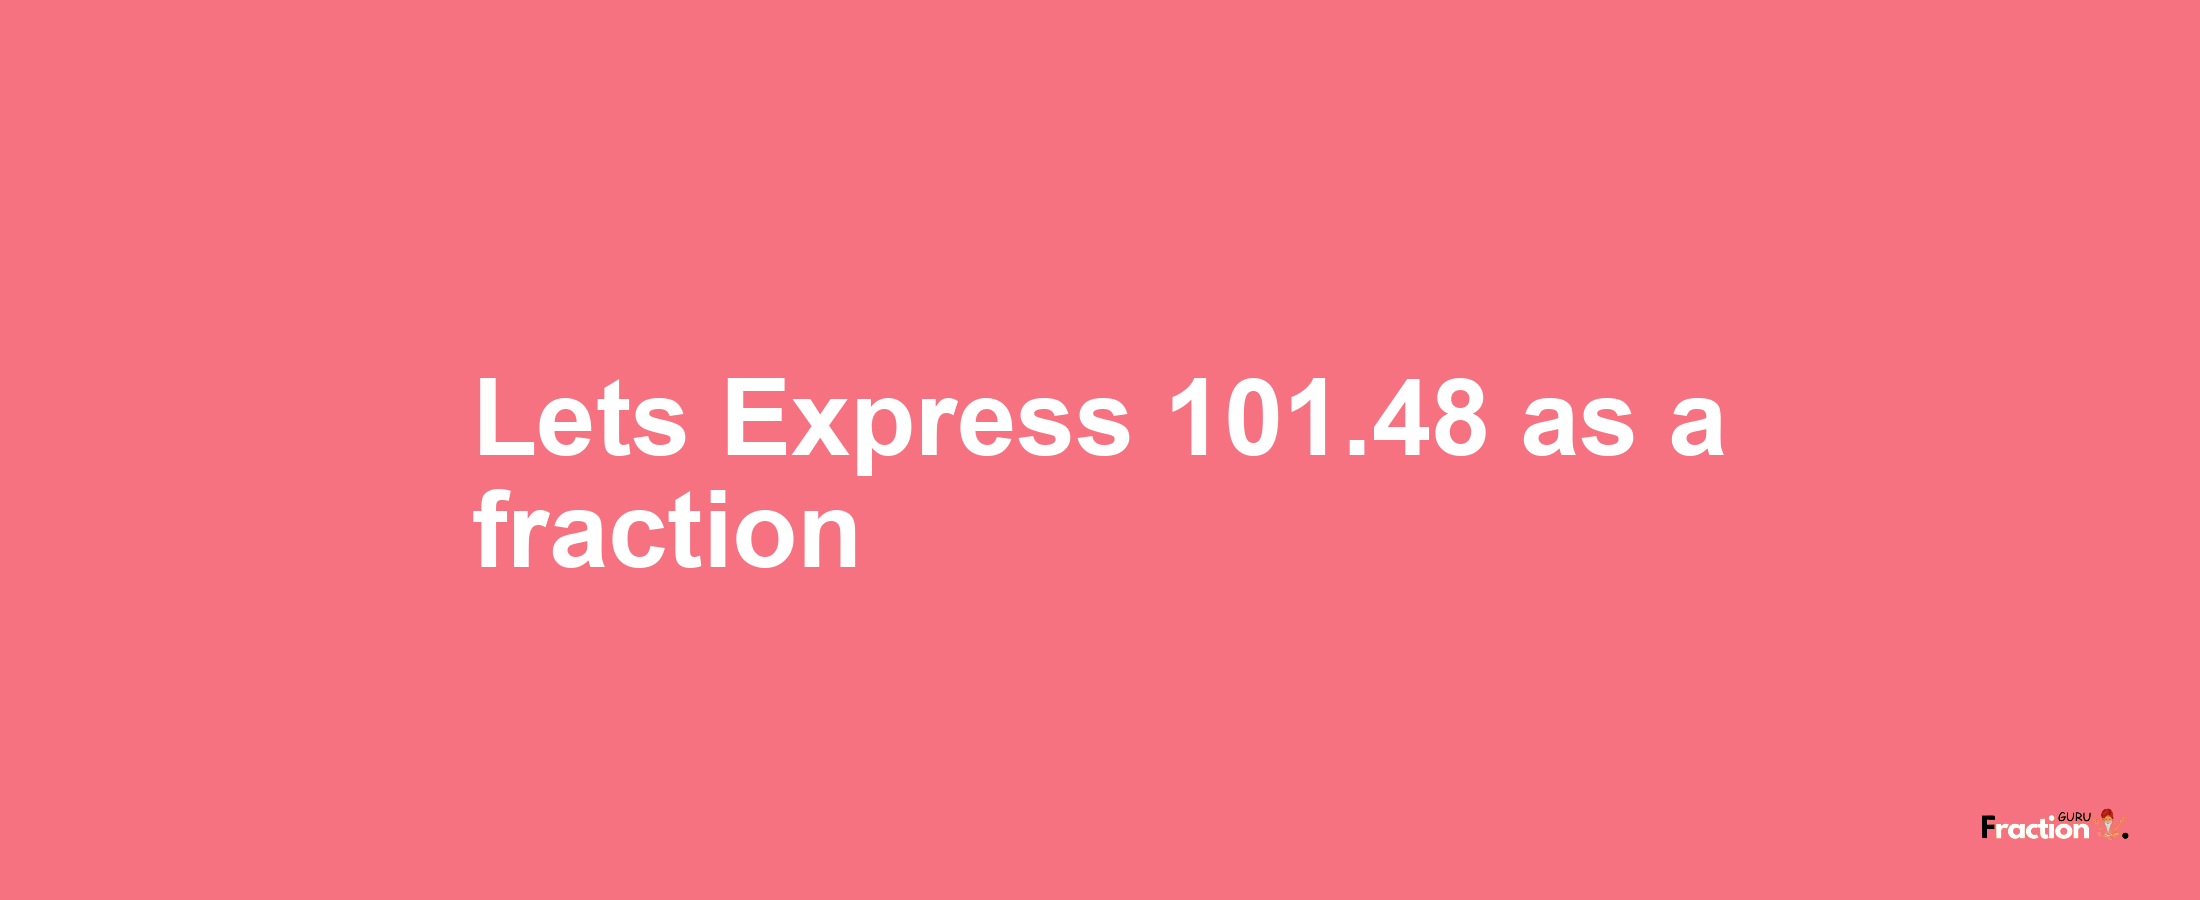 Lets Express 101.48 as afraction